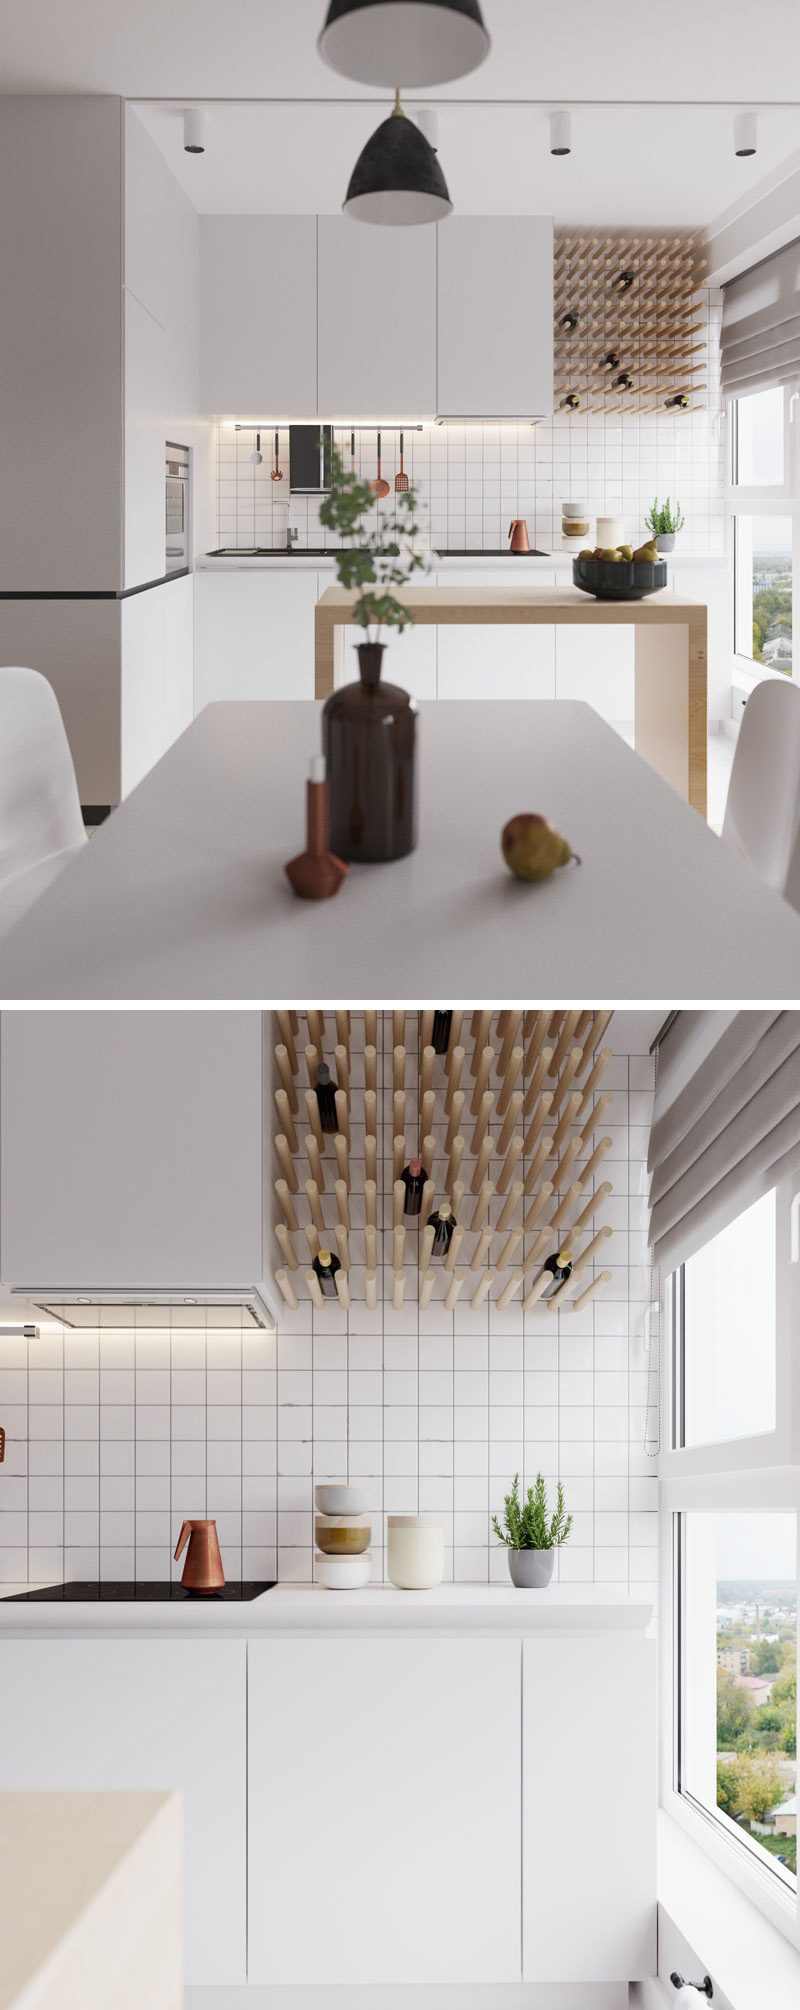 Wood pegs on the white walls are used for wine storage in this modern kitchen.